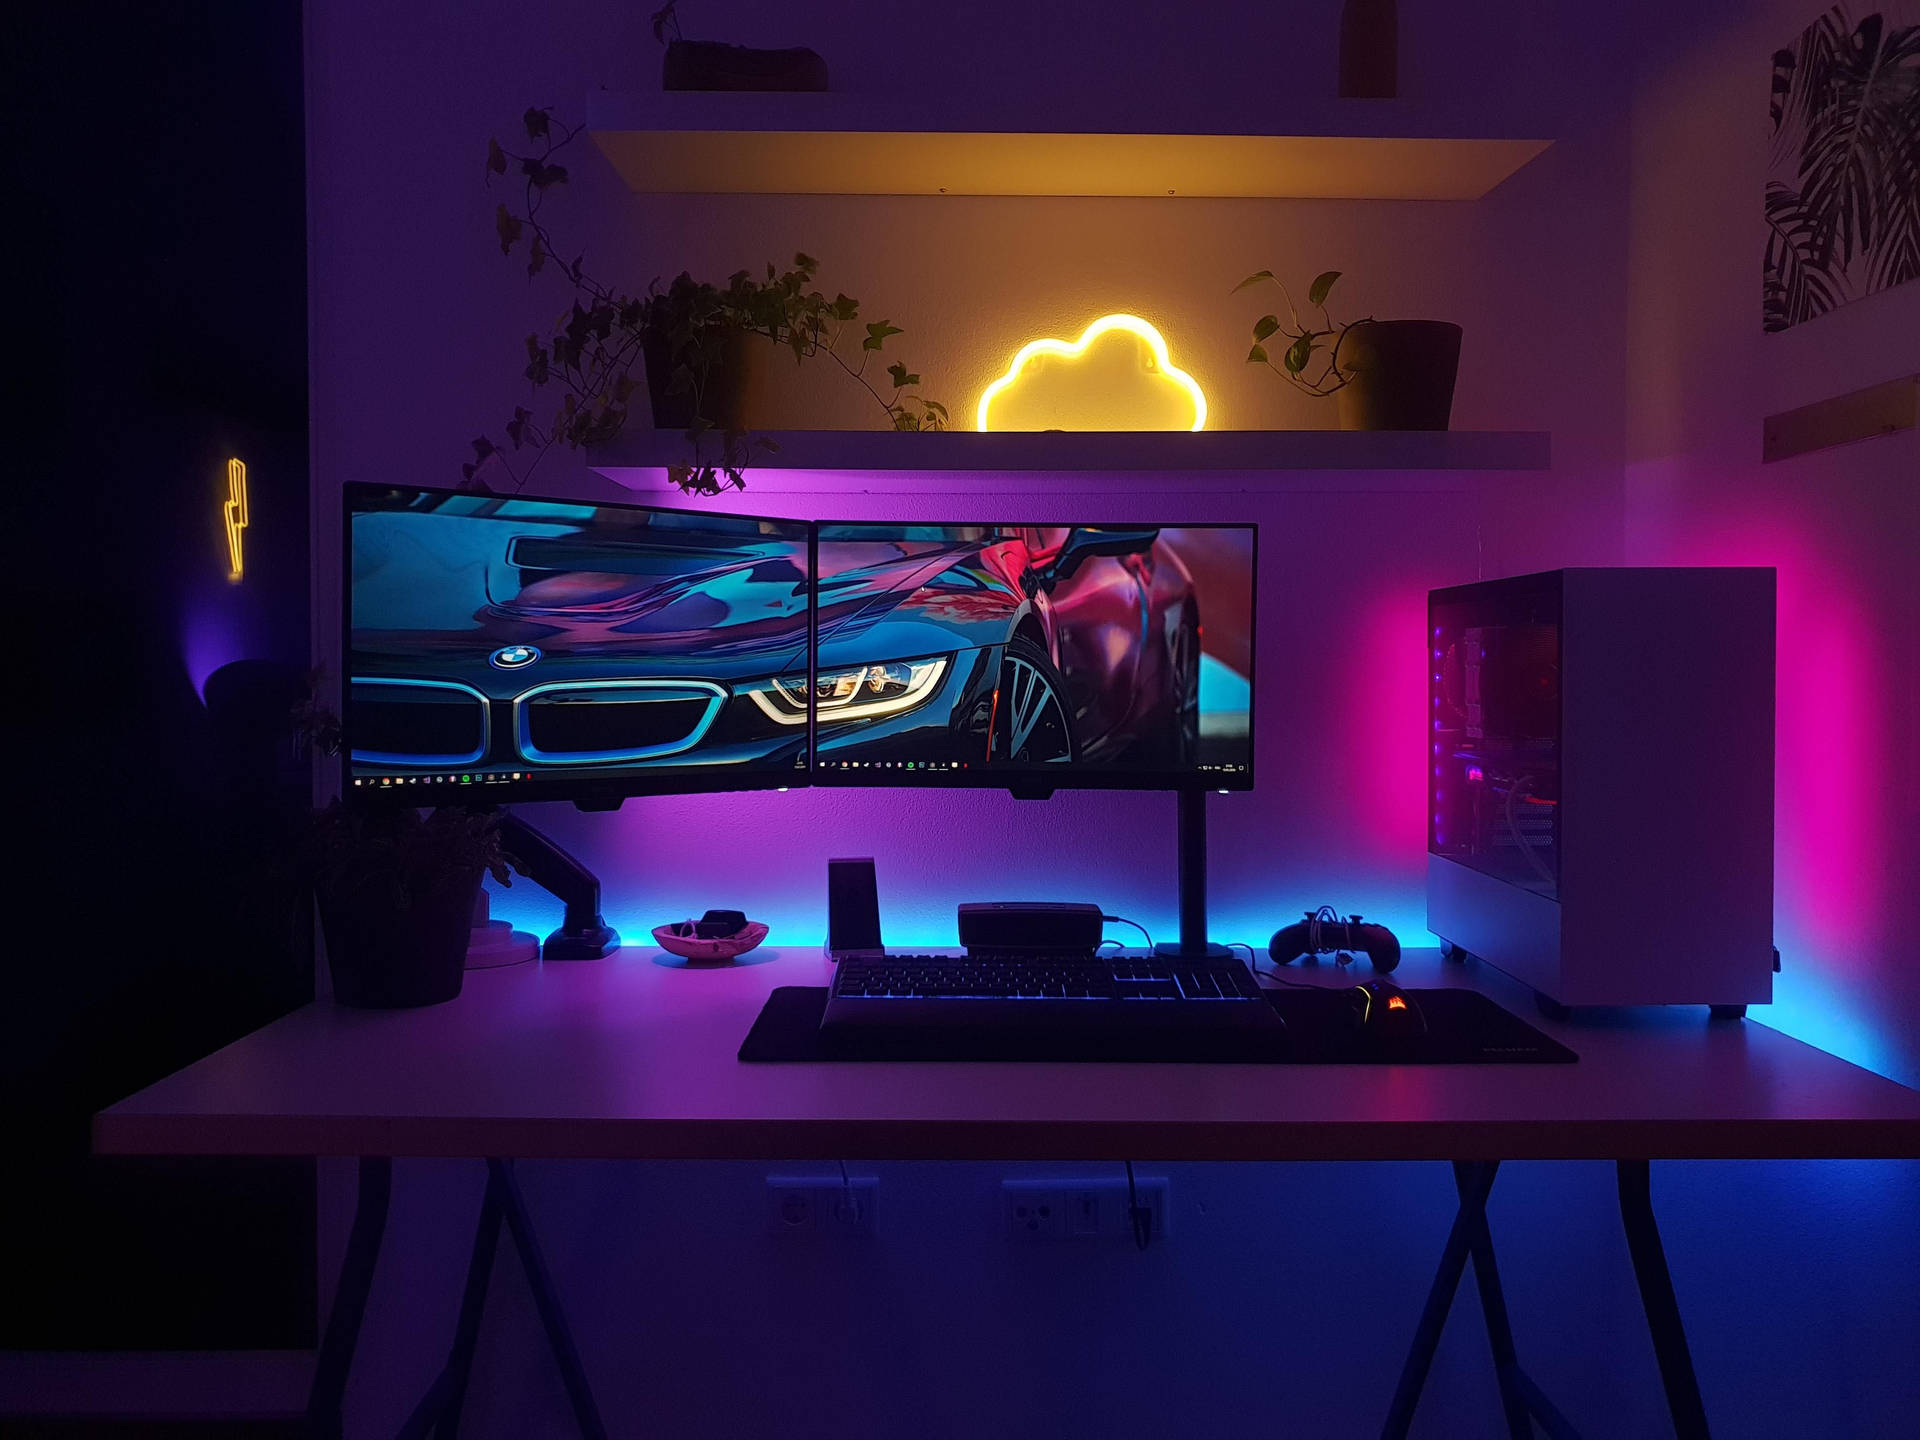 100+] Gaming Room Wallpapers 